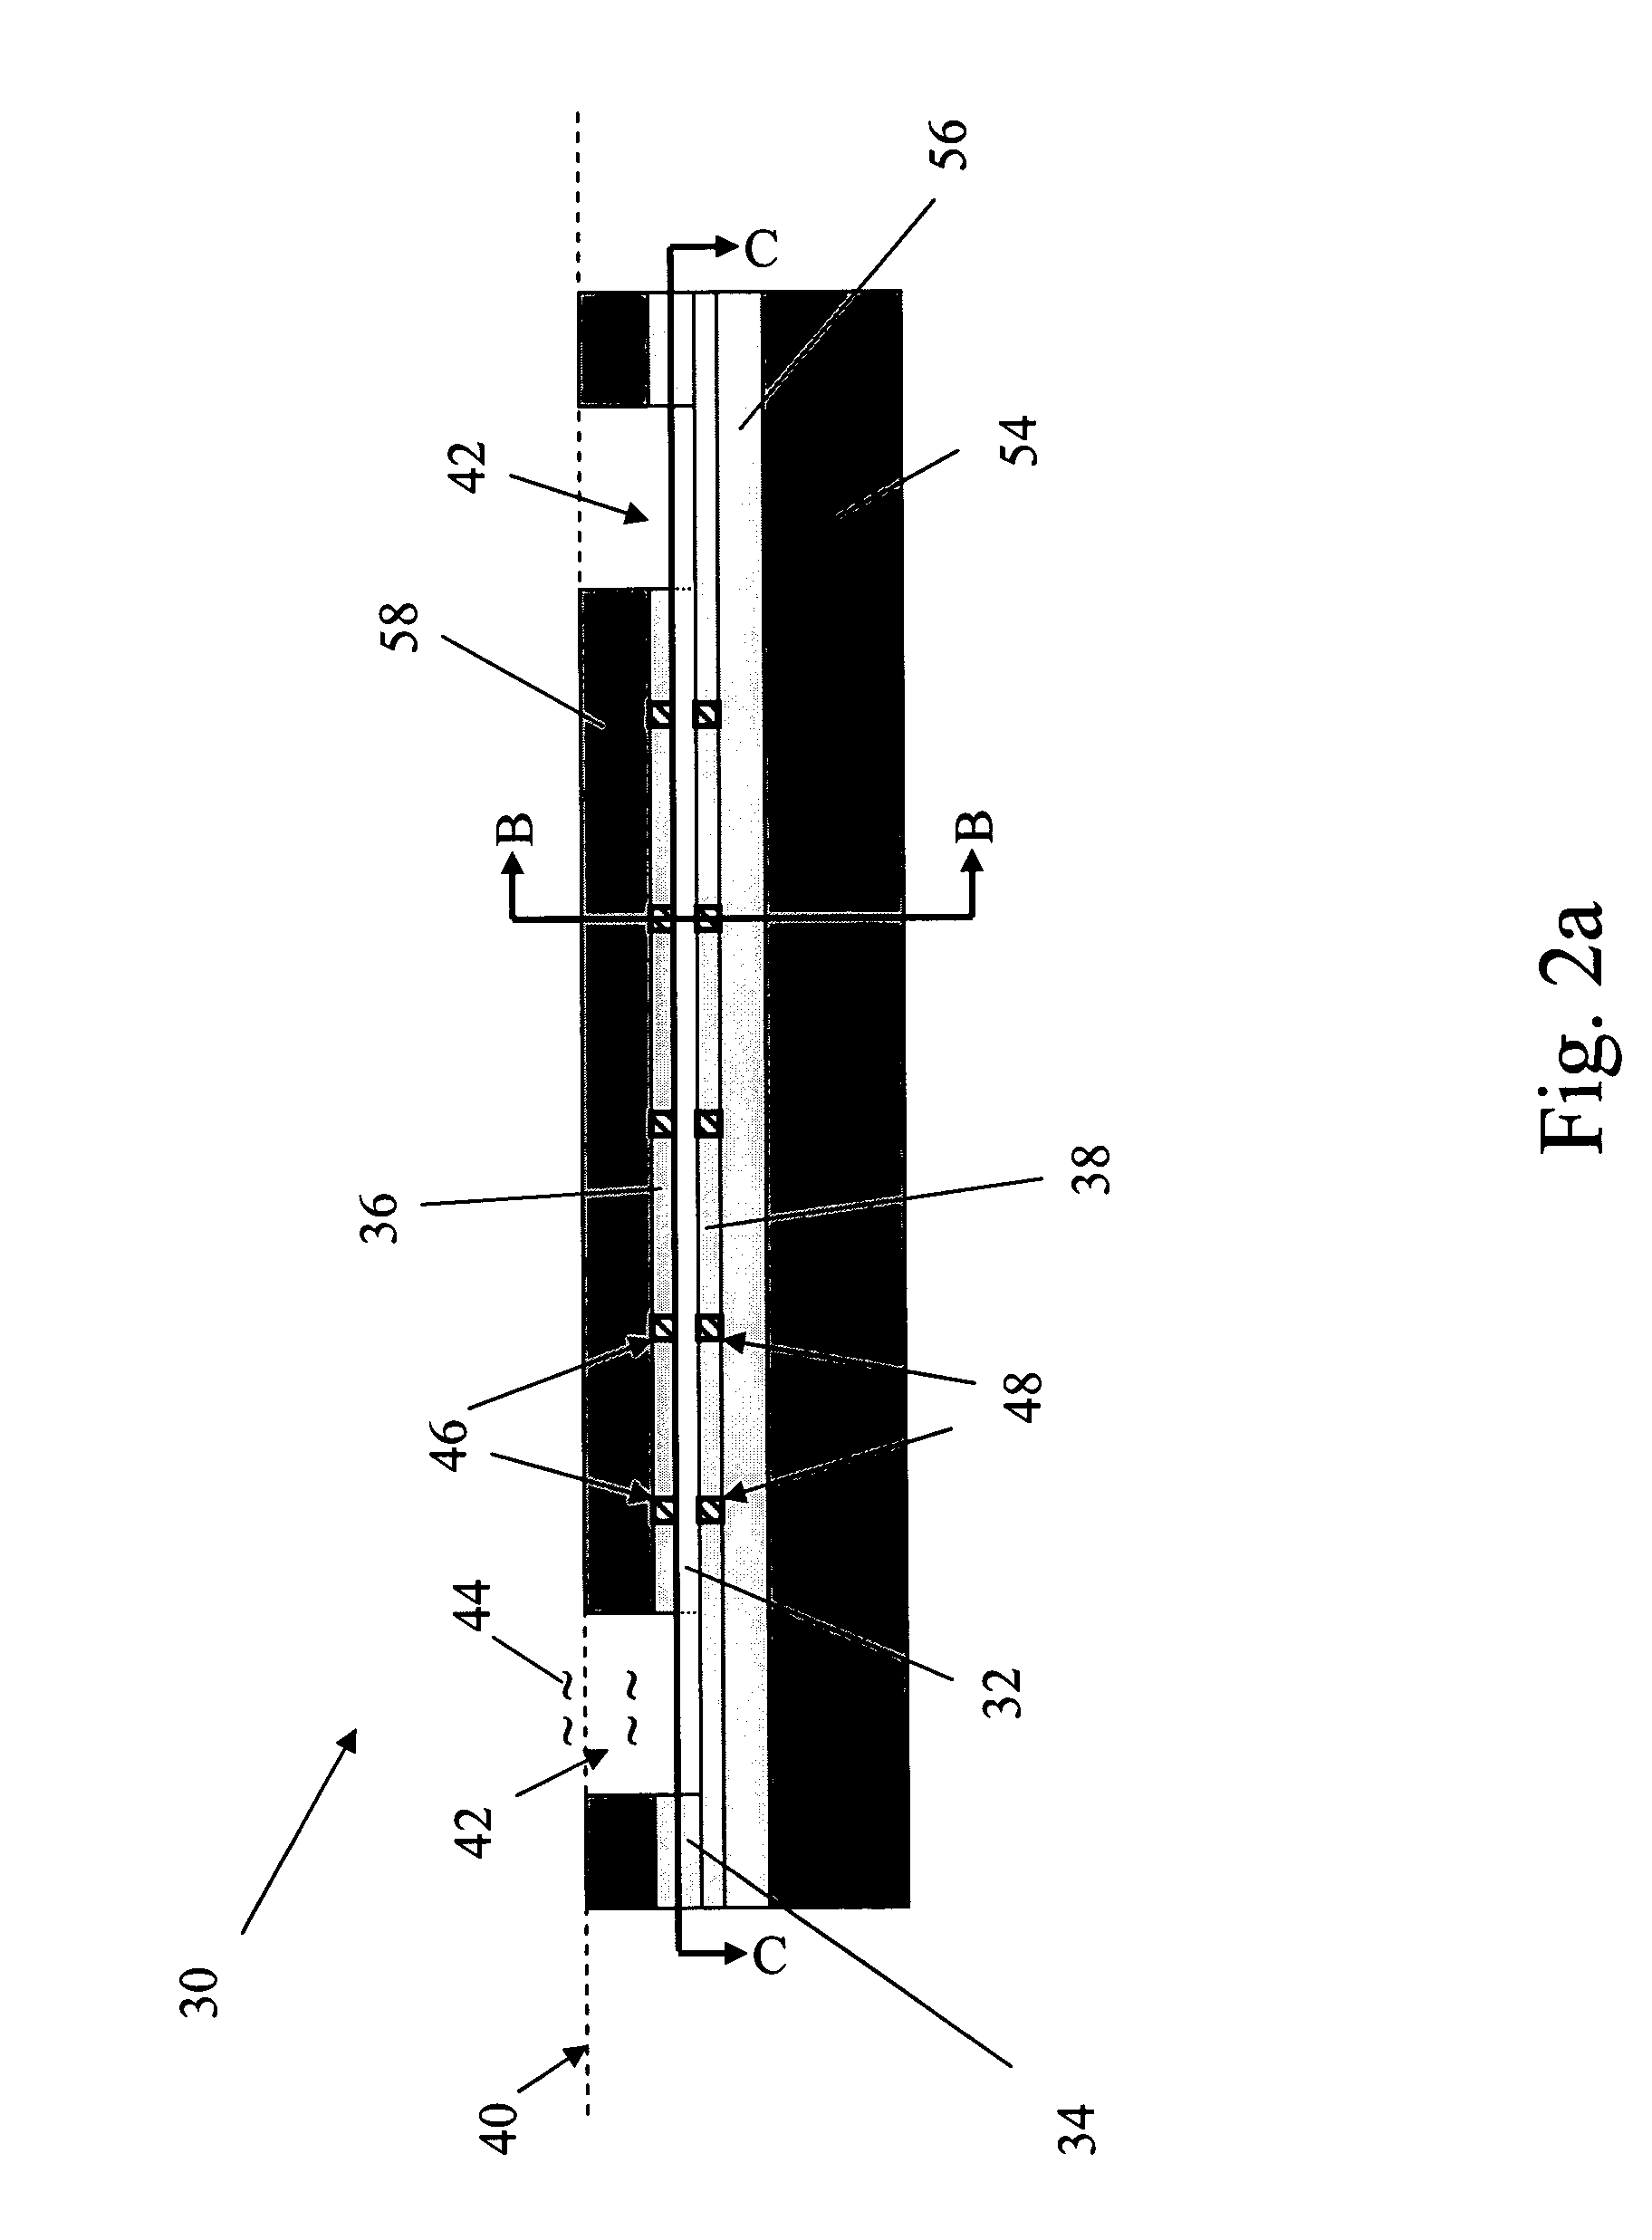 Micro sensor for electrochemically monitoring residue in micro channels